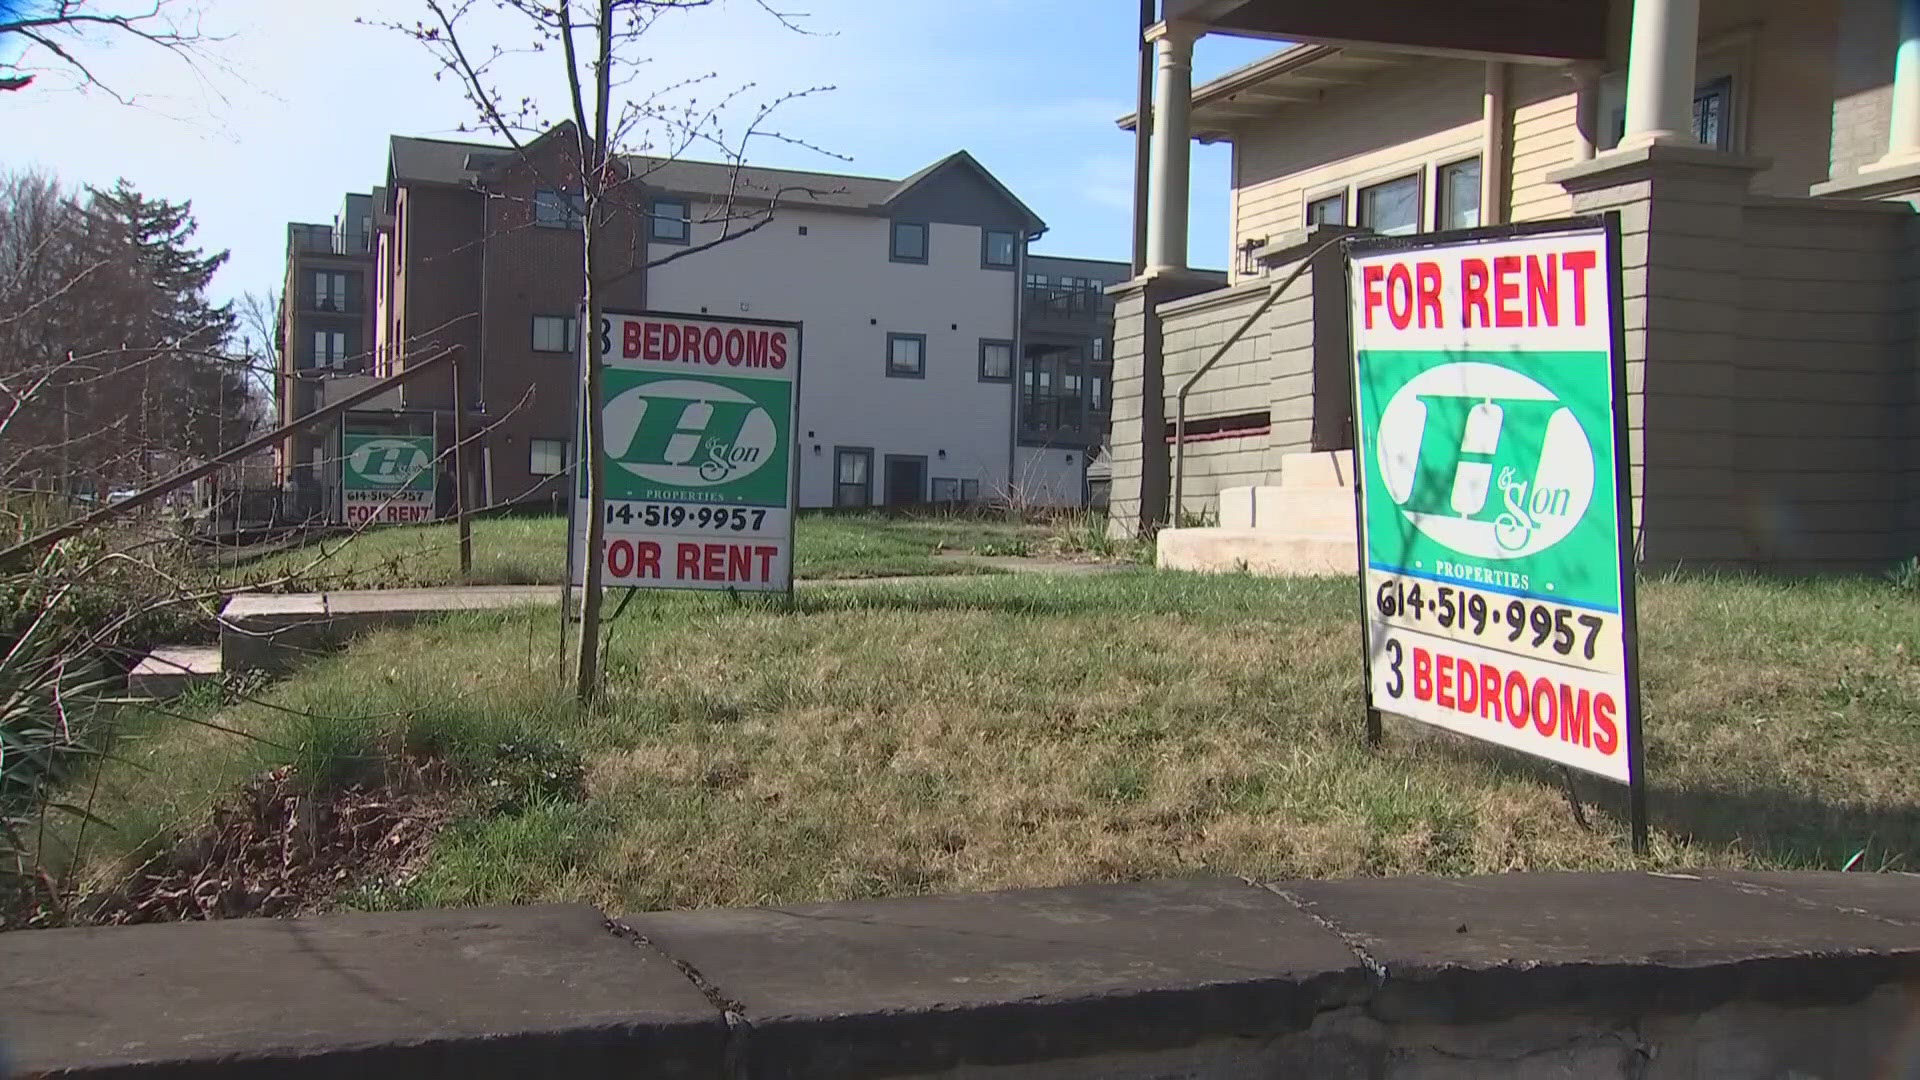 In Columbus, a lower supply of both apartments and homes ramps up the prices compared to other cities.